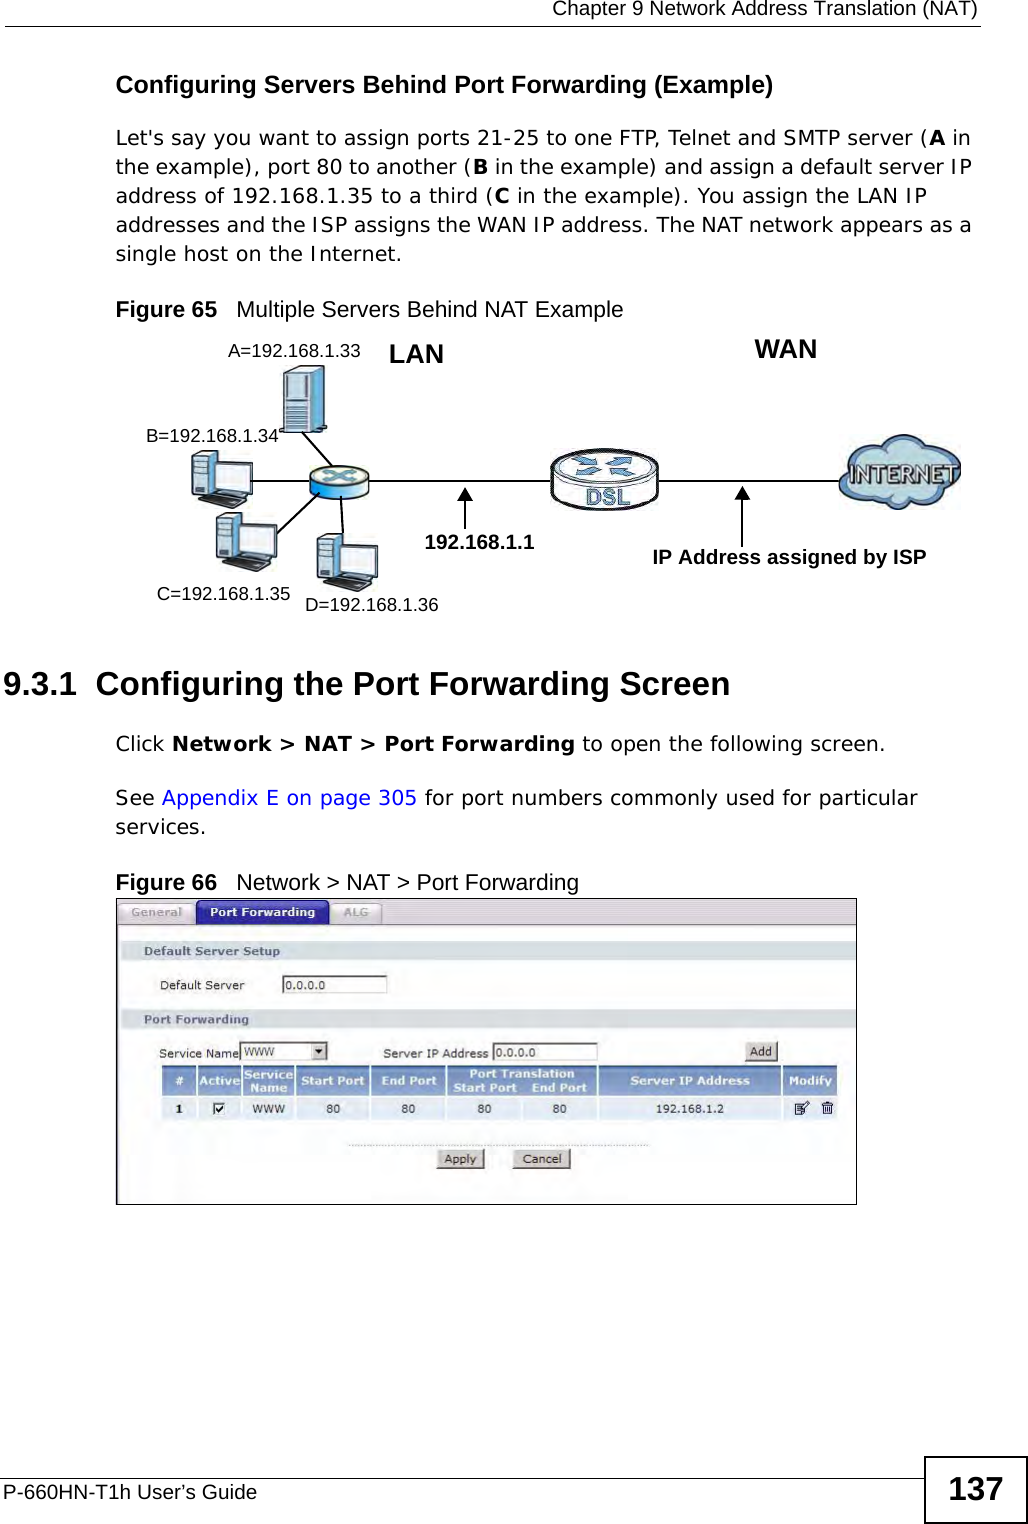  Chapter 9 Network Address Translation (NAT)P-660HN-T1h User’s Guide 137Configuring Servers Behind Port Forwarding (Example)Let&apos;s say you want to assign ports 21-25 to one FTP, Telnet and SMTP server (A in the example), port 80 to another (B in the example) and assign a default server IP address of 192.168.1.35 to a third (C in the example). You assign the LAN IP addresses and the ISP assigns the WAN IP address. The NAT network appears as a single host on the Internet.Figure 65   Multiple Servers Behind NAT Example9.3.1  Configuring the Port Forwarding ScreenClick Network &gt; NAT &gt; Port Forwarding to open the following screen.See Appendix E on page 305 for port numbers commonly used for particular services. Figure 66   Network &gt; NAT &gt; Port ForwardingA=192.168.1.33D=192.168.1.36C=192.168.1.35B=192.168.1.34WANLAN192.168.1.1 IP Address assigned by ISP